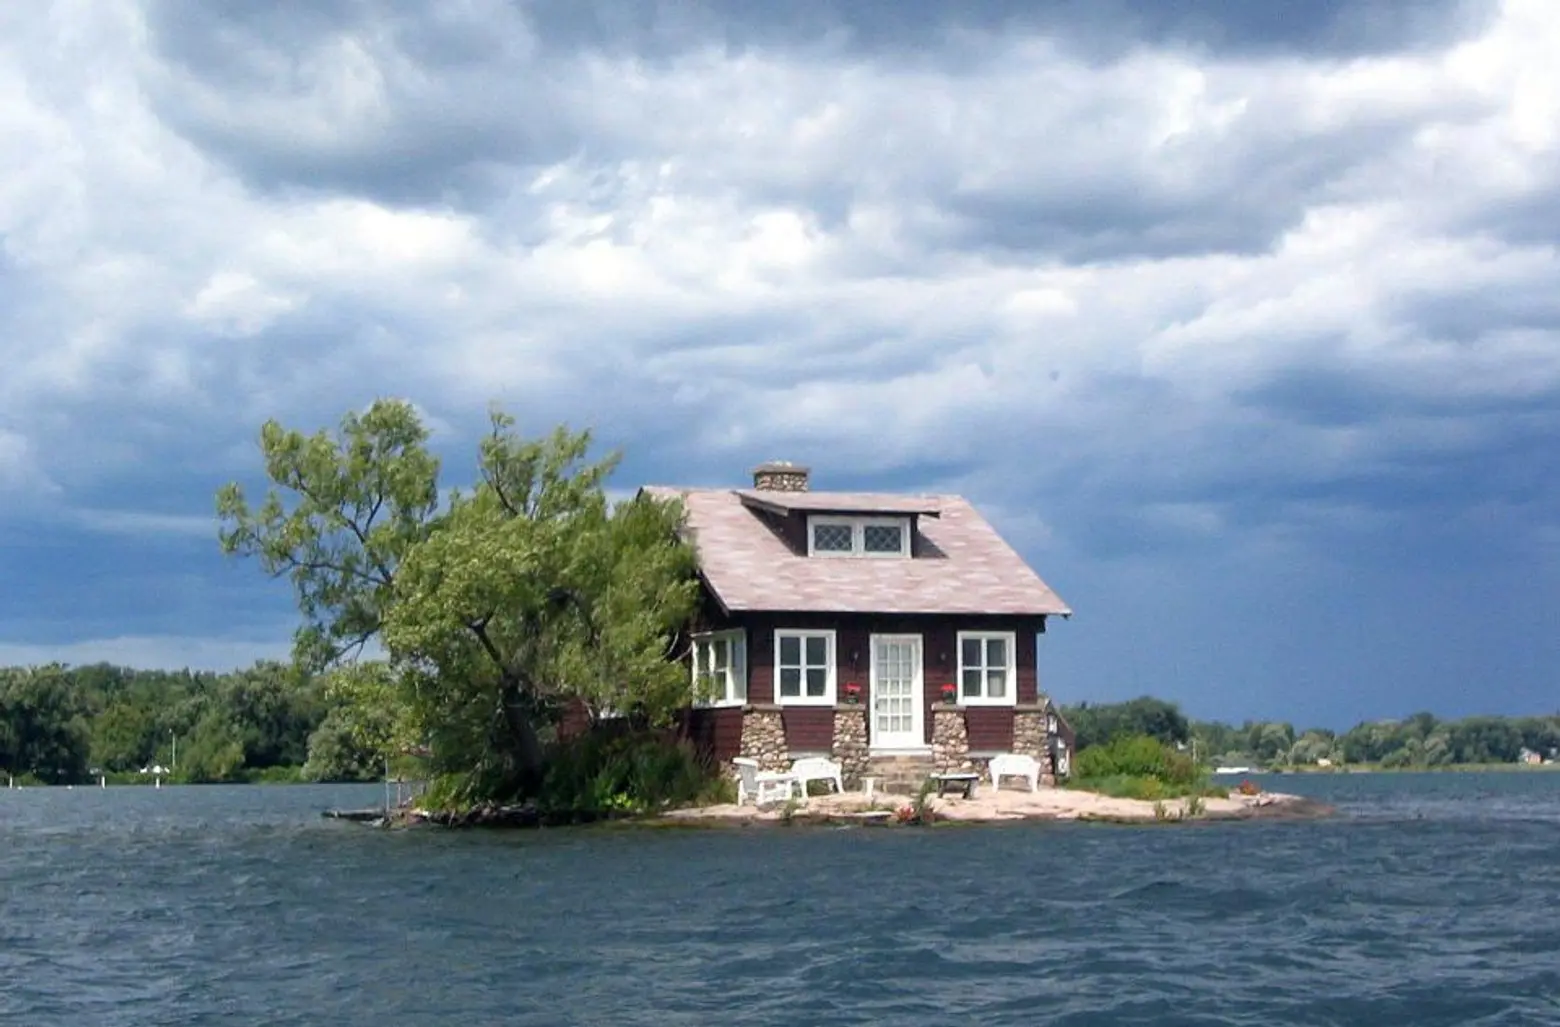 Off New York’s coast, ‘Just Room Enough Island’ fits only one house and a tree